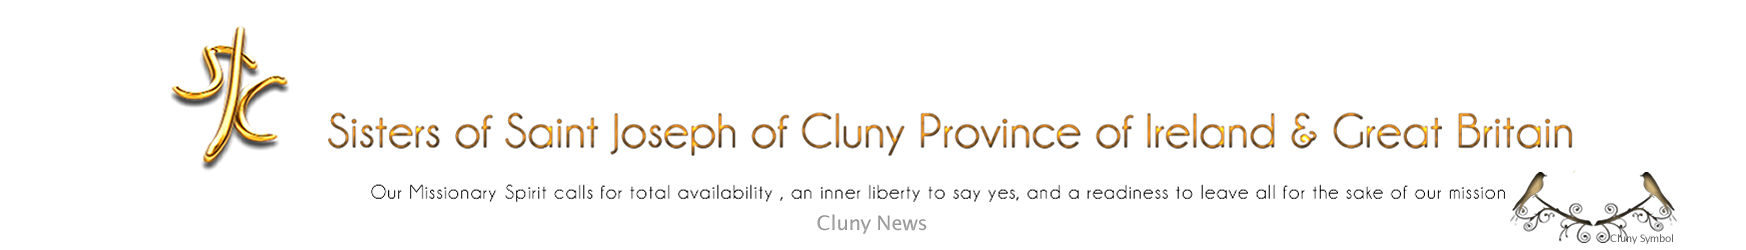 cluny news events